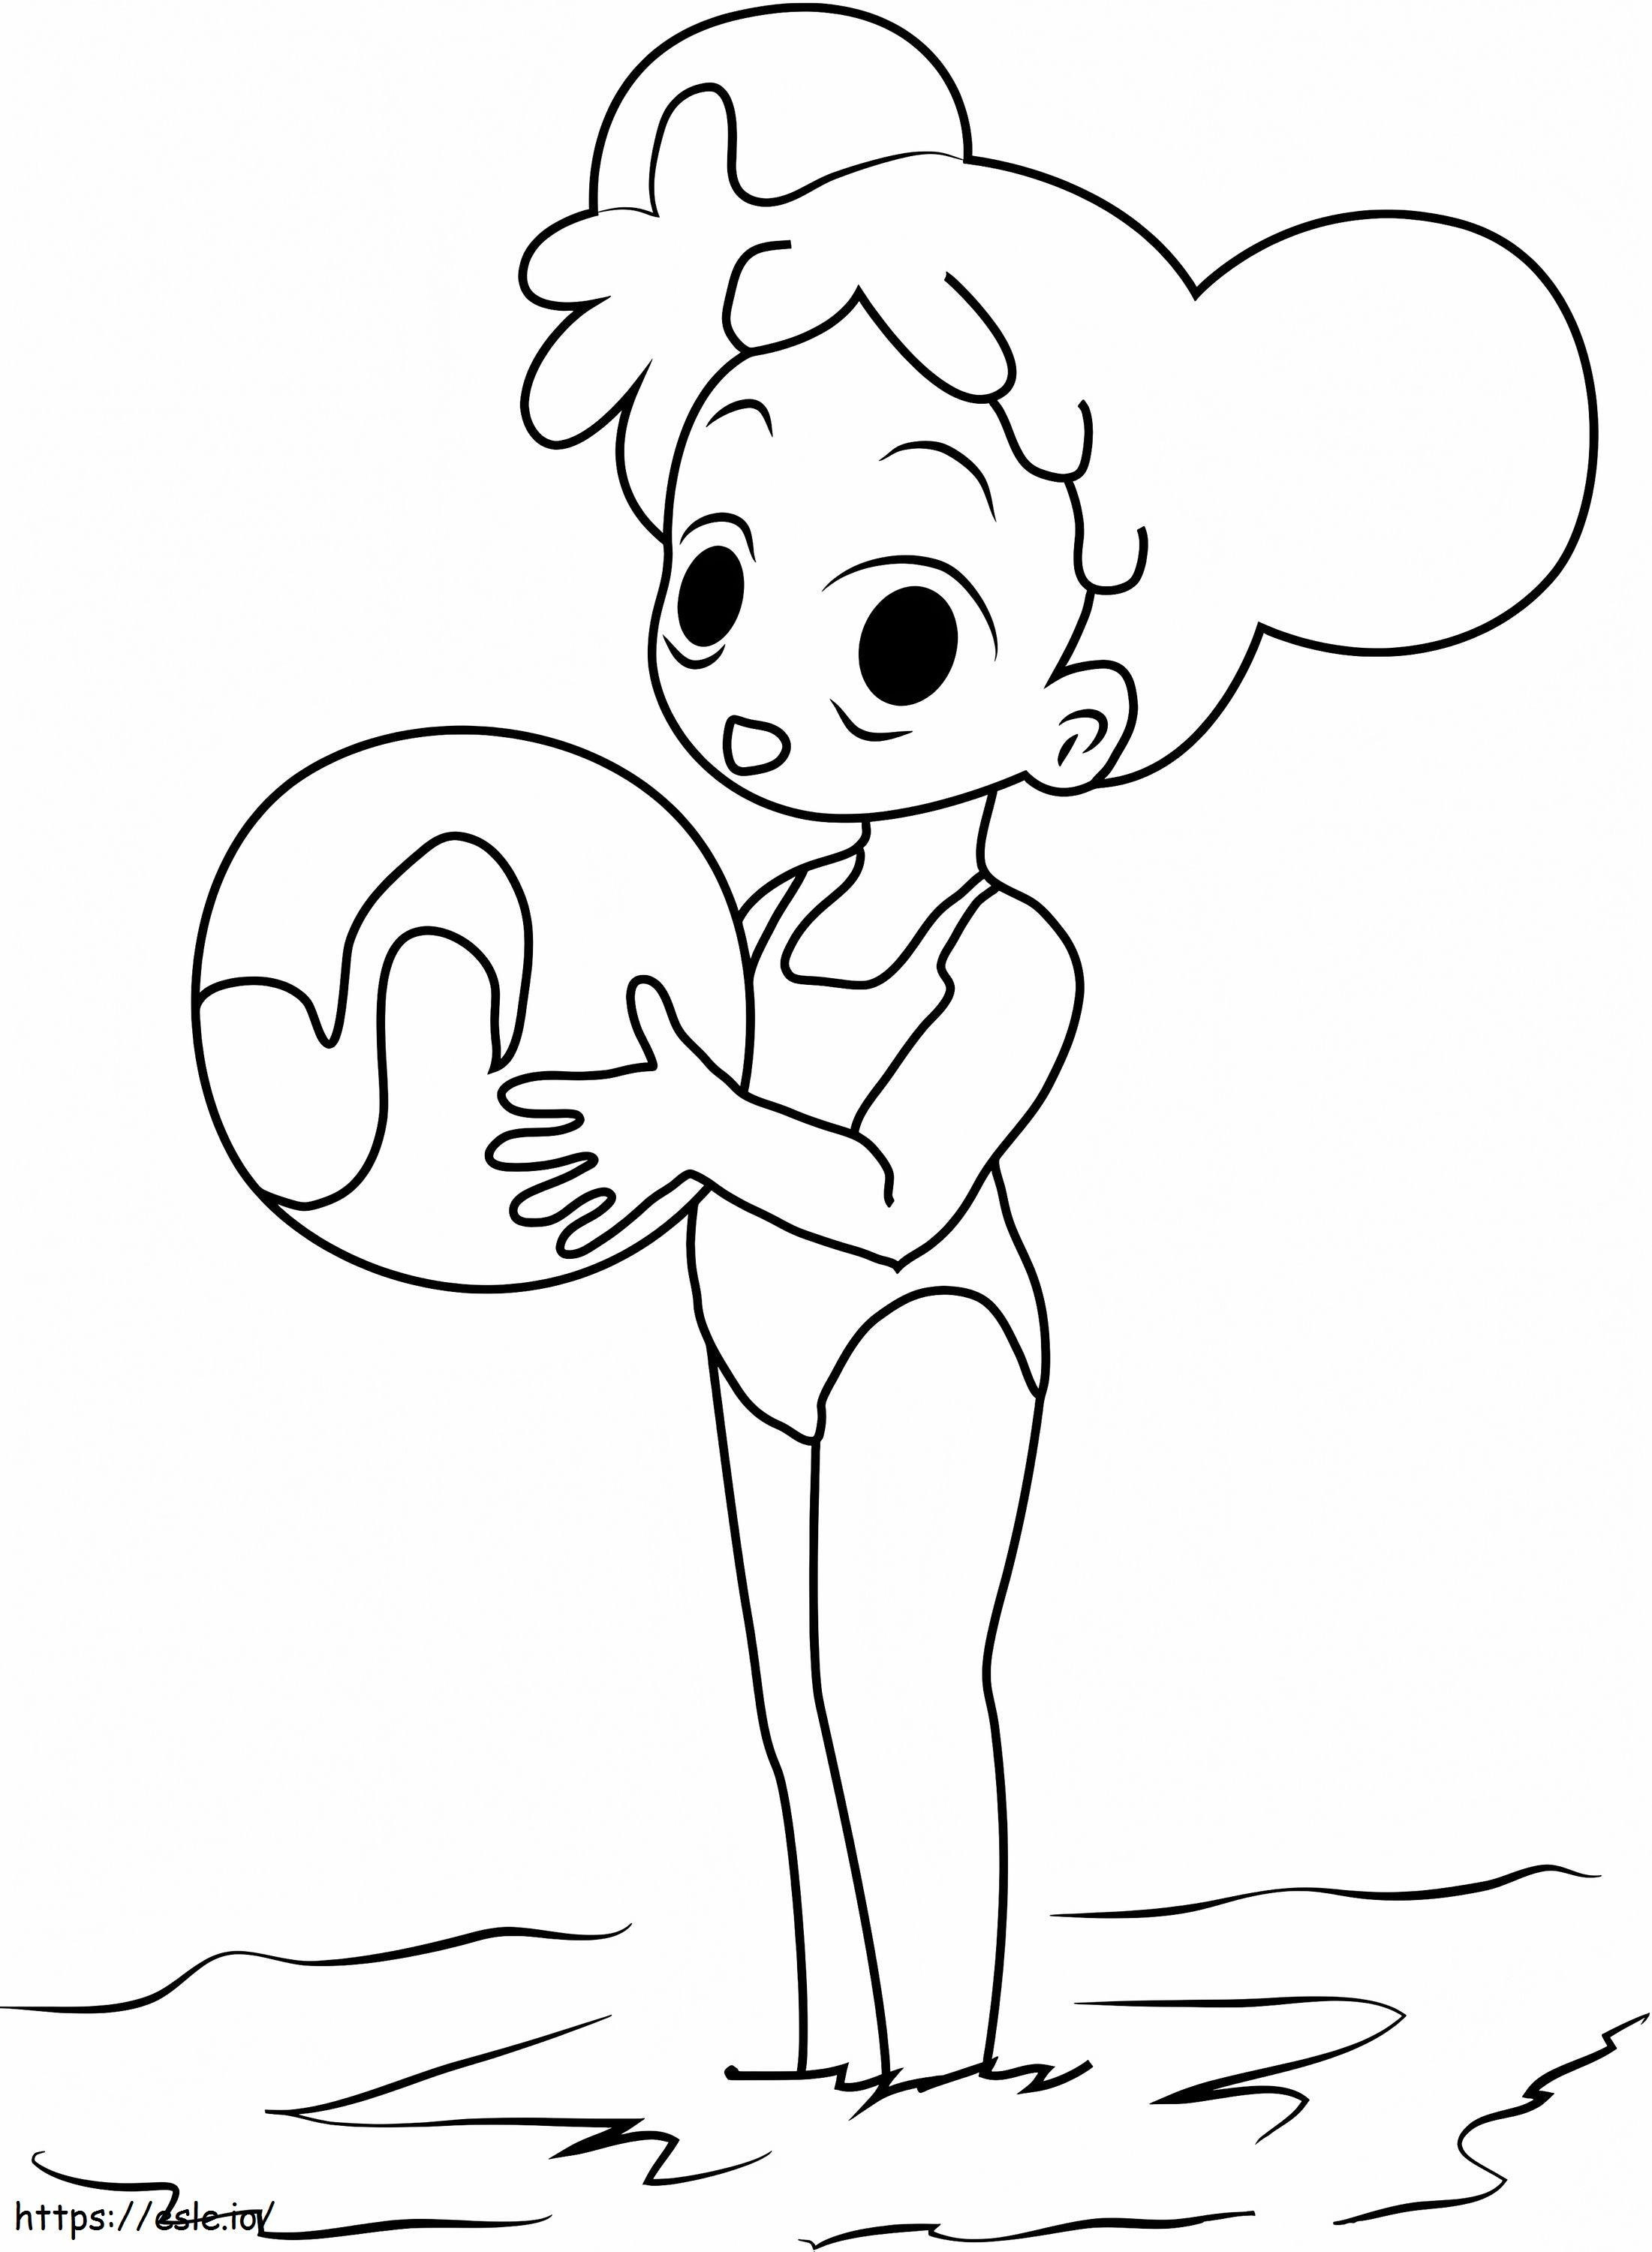 1531099692 Doremi With Ball A4 coloring page